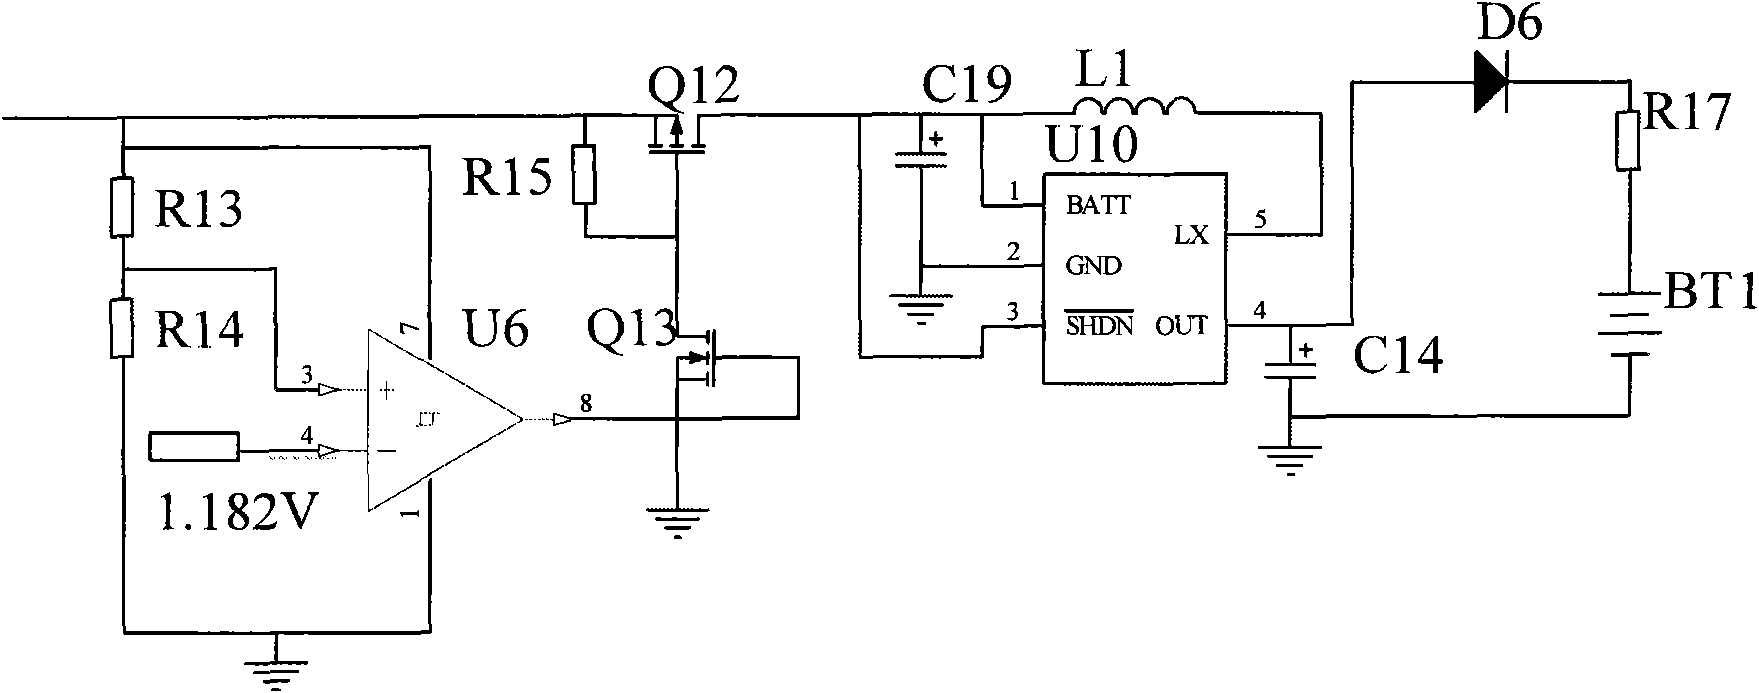 Piezoelectric energy recovery device for recovering vibrational energy